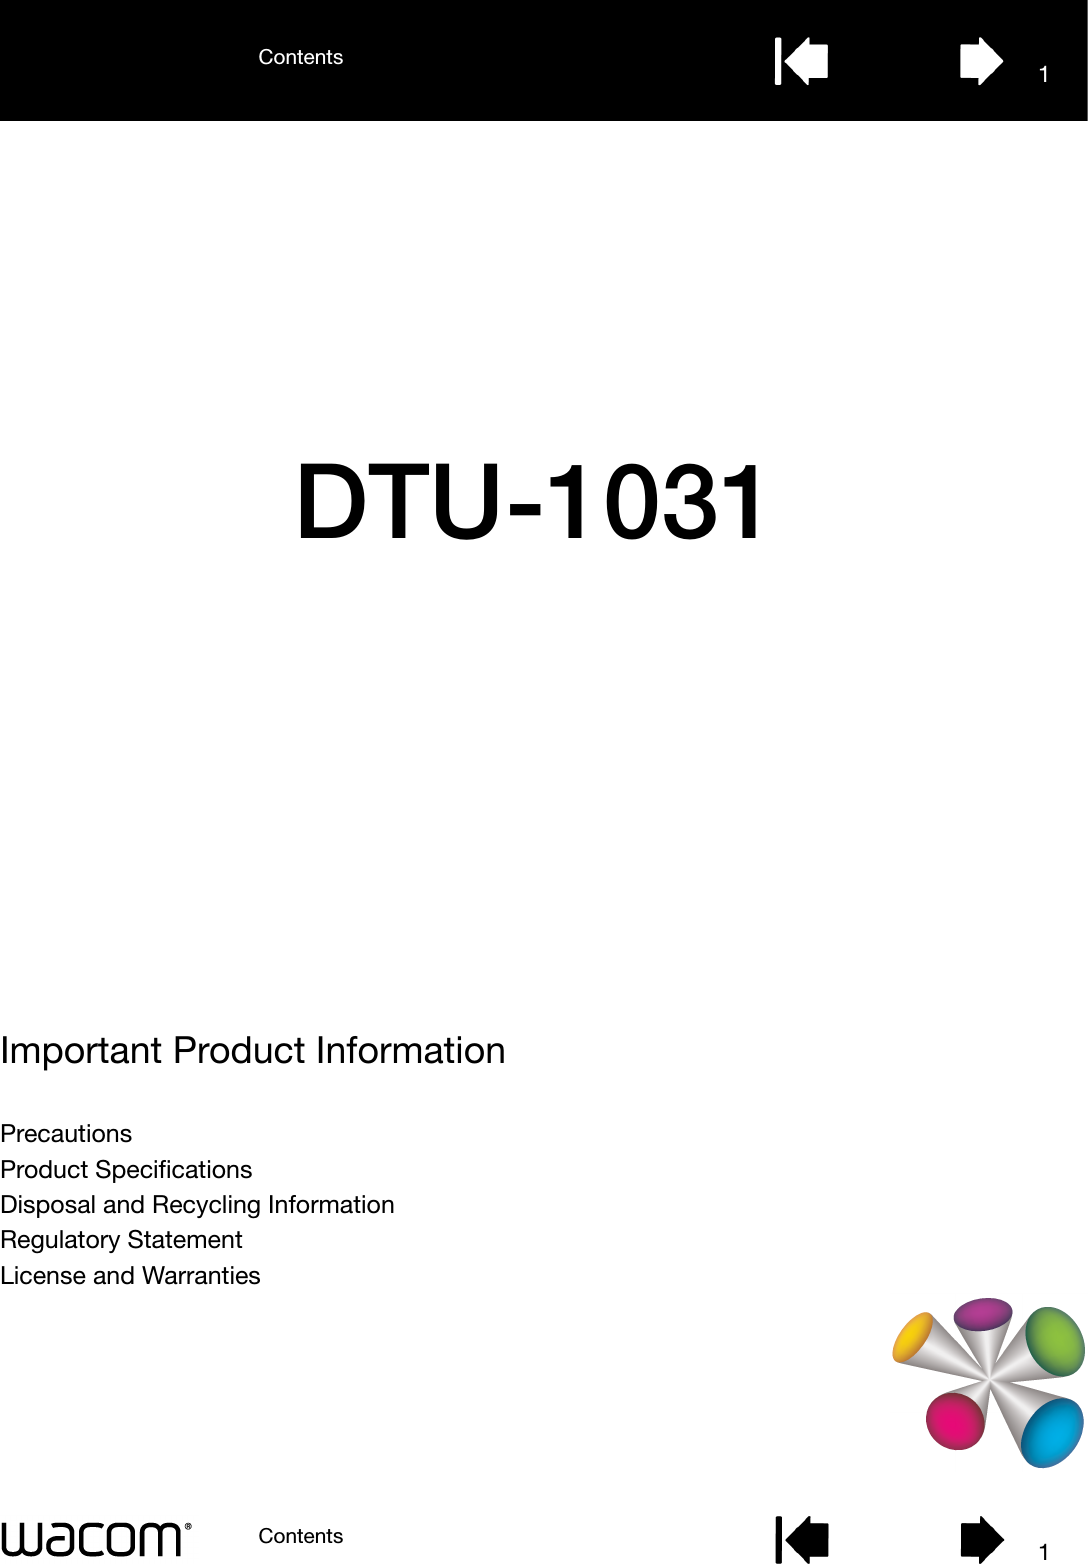 Important Product InformationContentsContents 11PrecautionsProduct Specifications Disposal and Recycling InformationRegulatory StatementLicense and WarrantiesDTU-1031